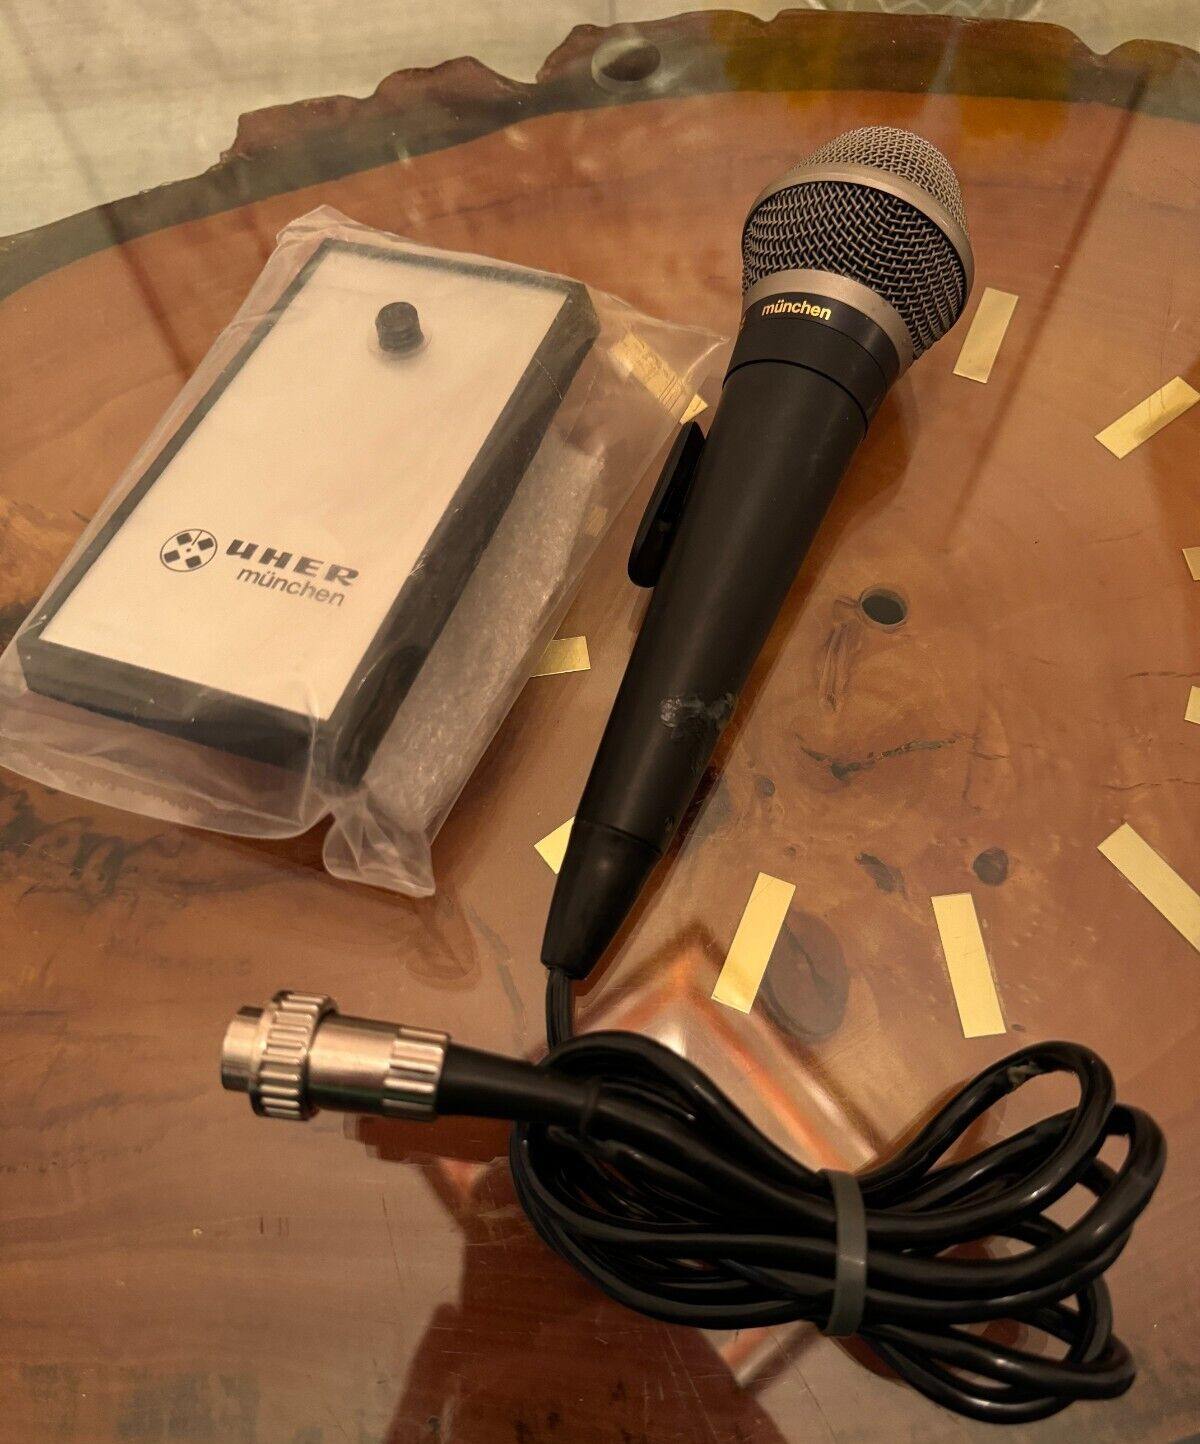 Uher Munchen M518A Microphone Very Good Condition.